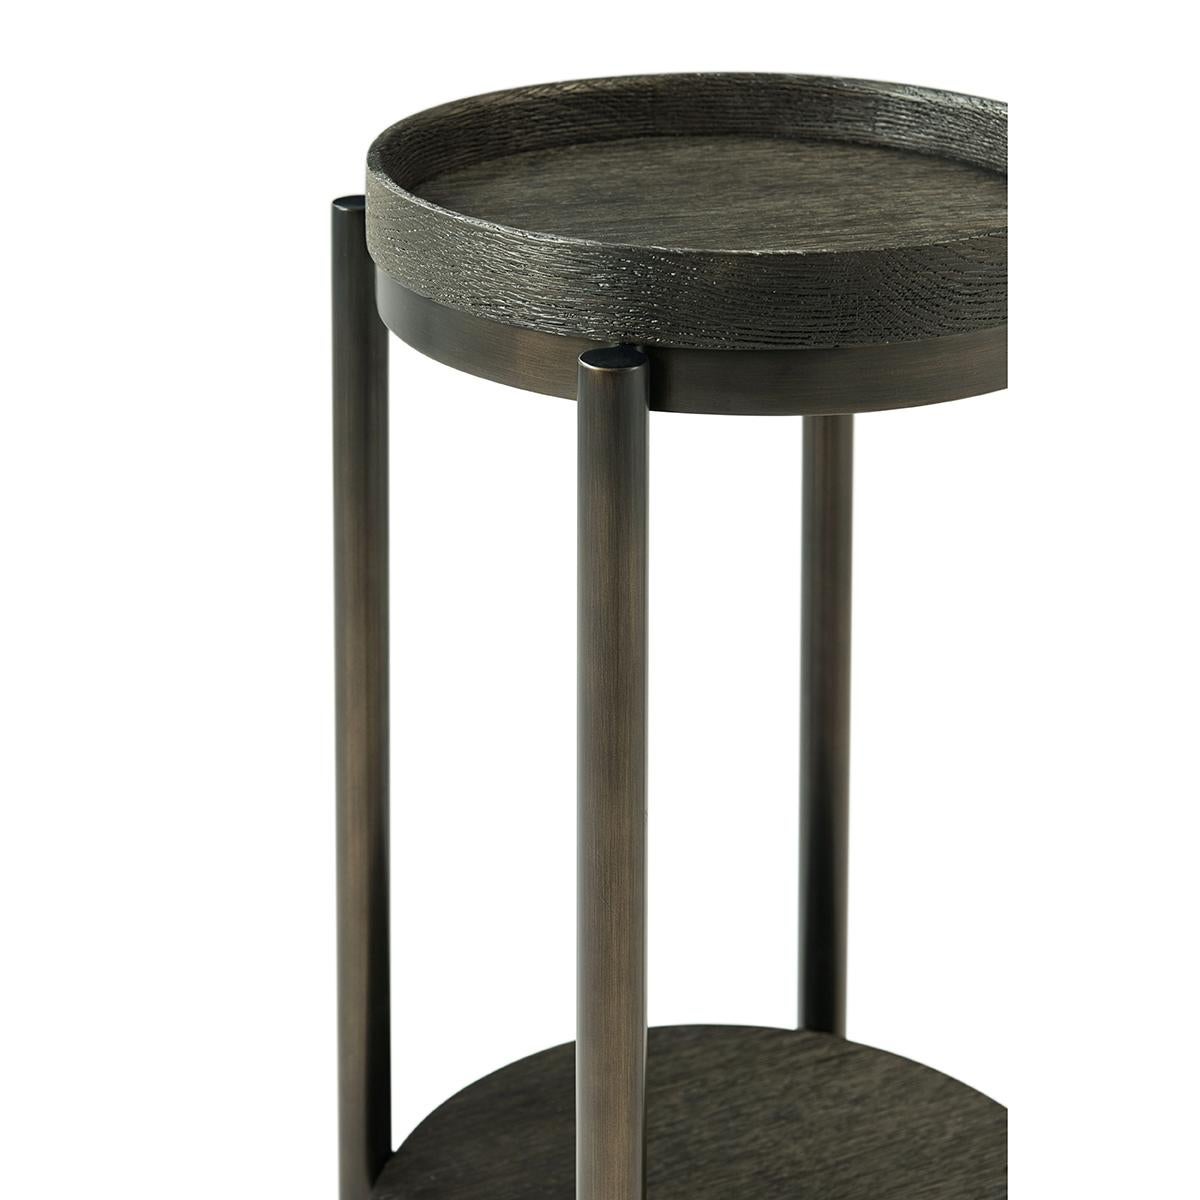 Contemporary Modern Round Accent Table - Dark For Sale